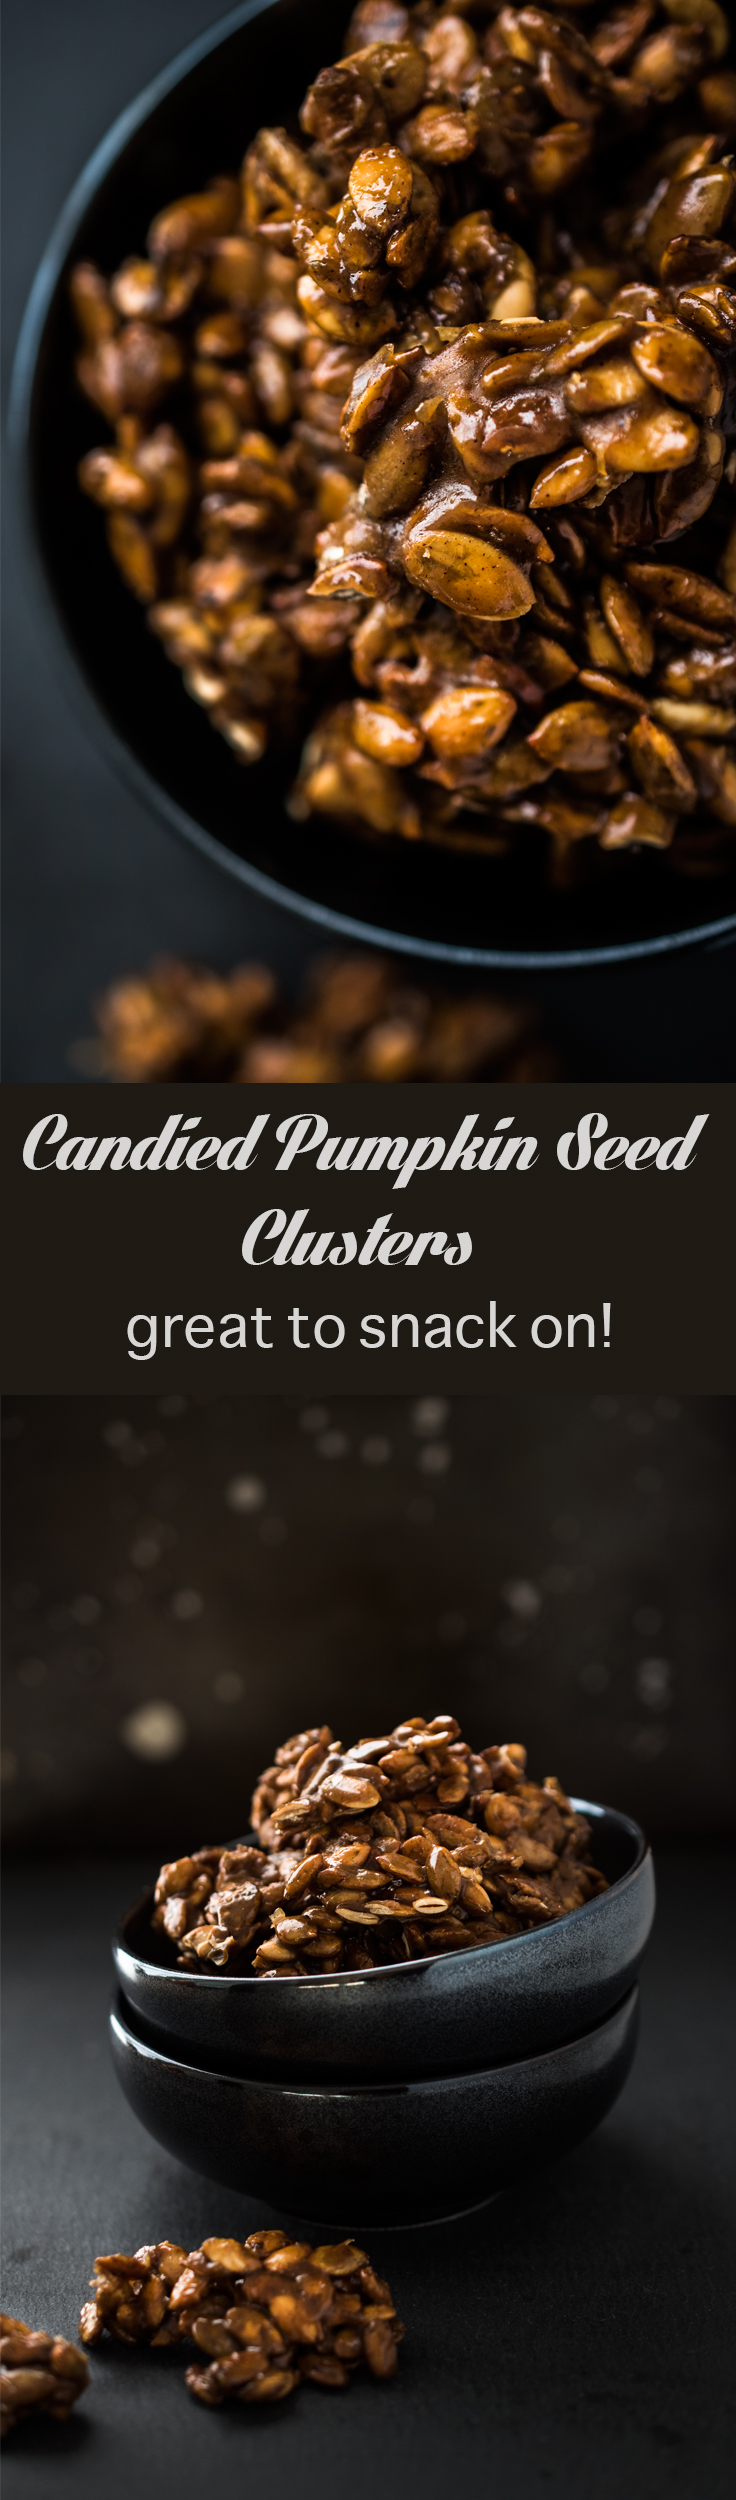 Candied Pumpkin Seed Clusters with pumpkin pie spices - great to snack on and totally delicious! 